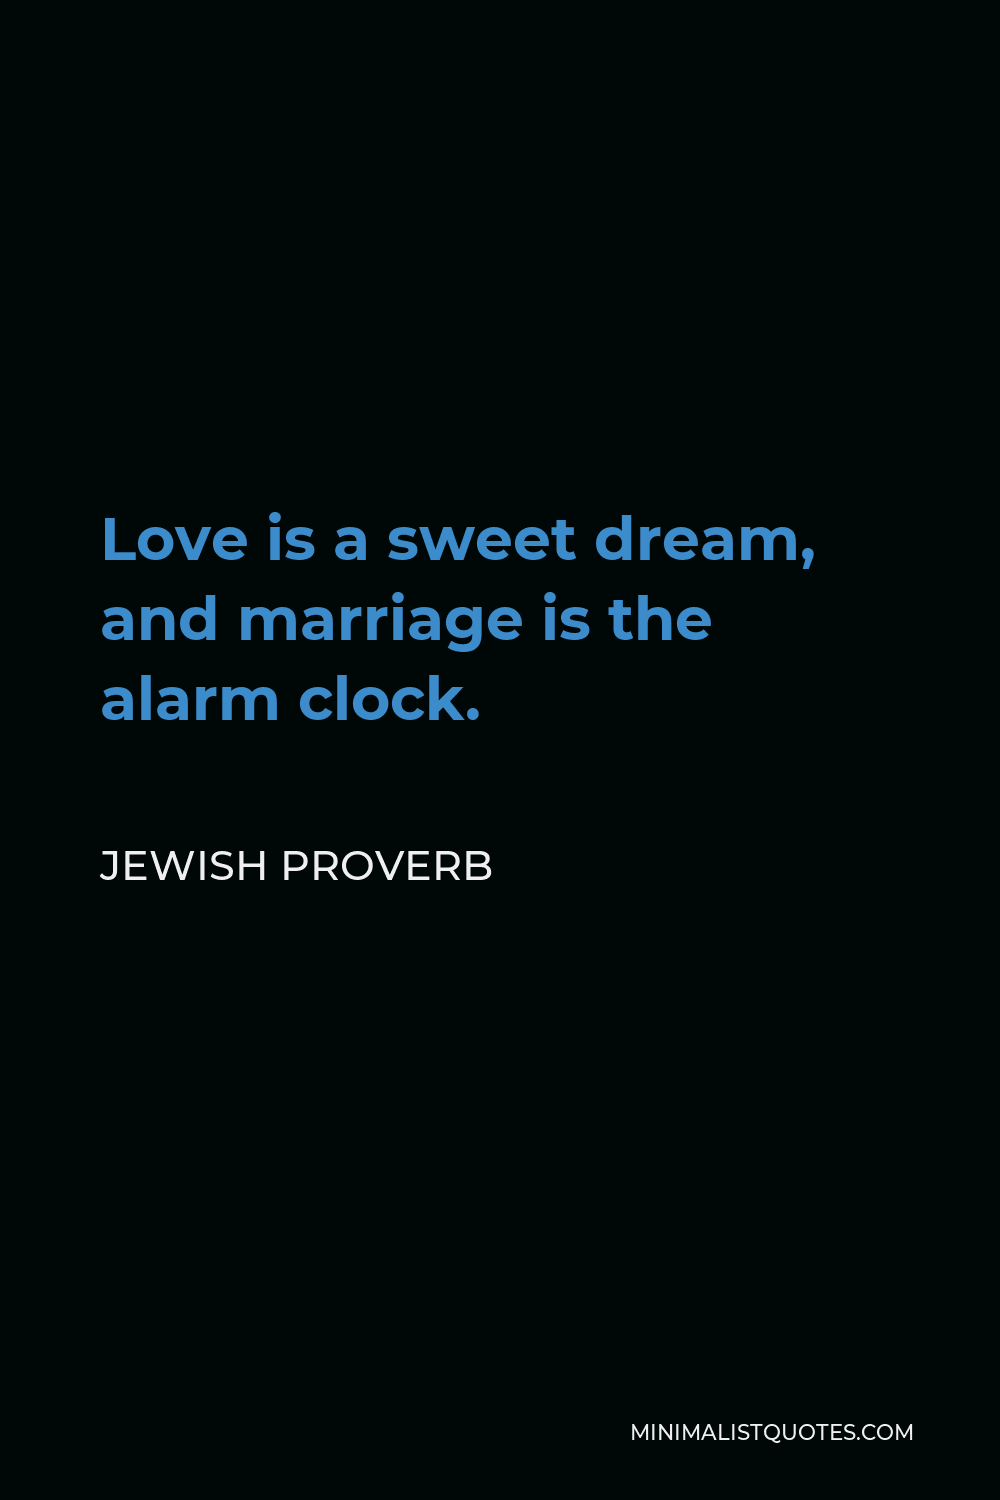 Jewish Proverb Quote - Love is a sweet dream, and marriage is the alarm clock.